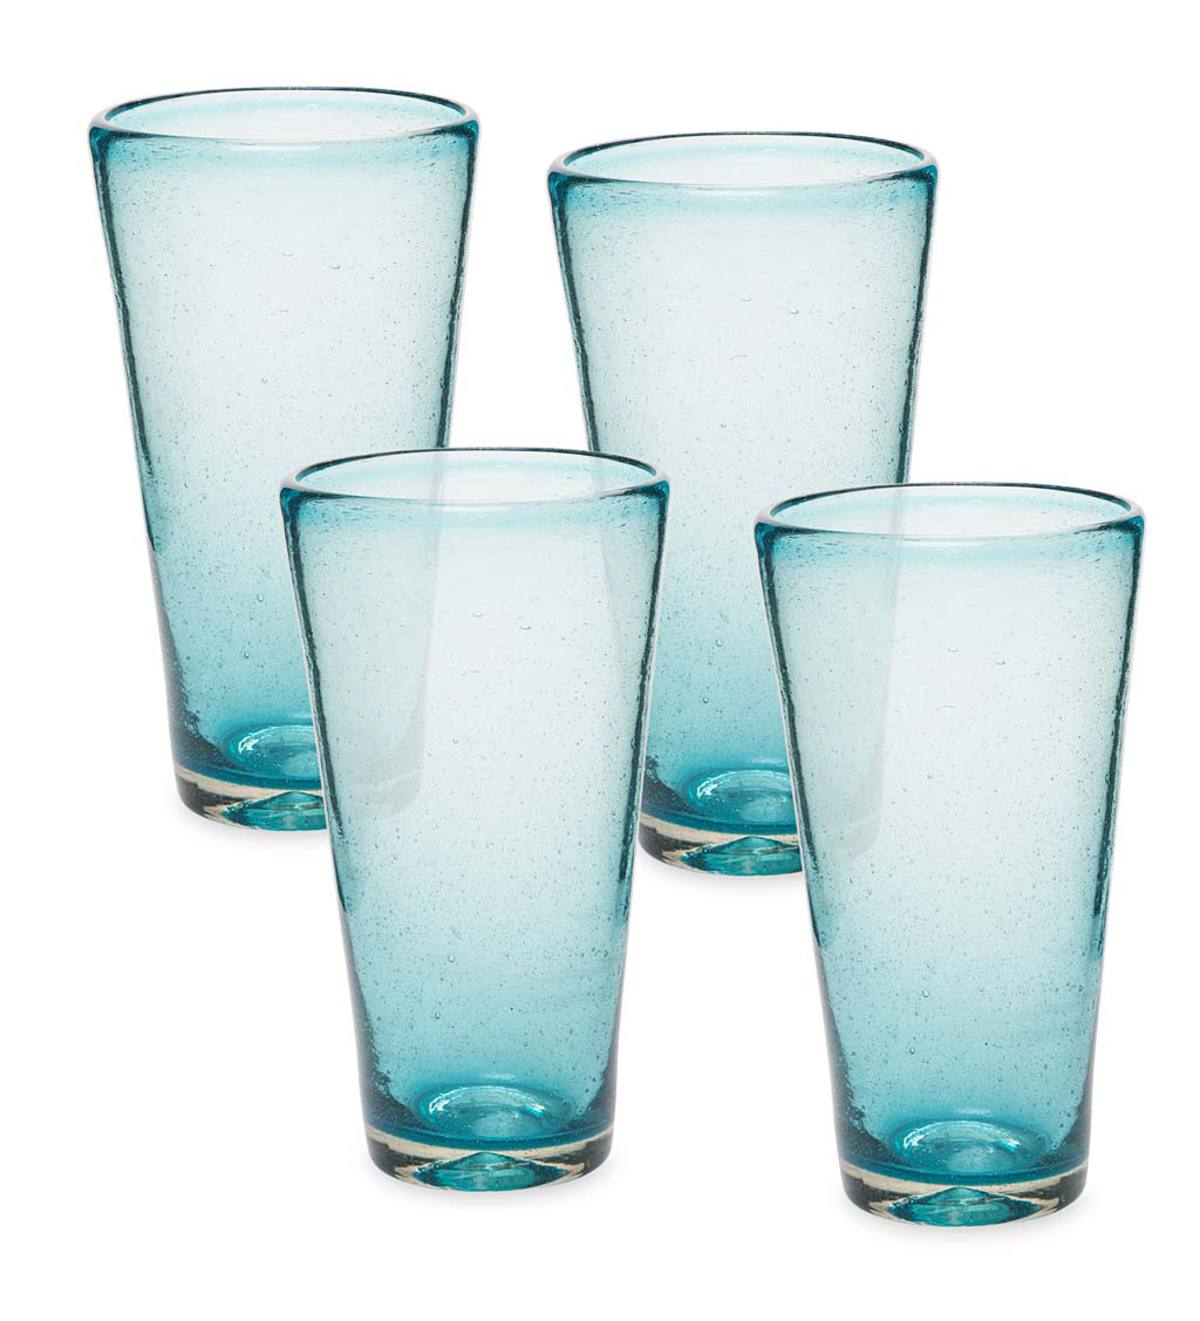 Bubble Recycled Glass Iced Tea Glasses, Set of 4 - Cobalt